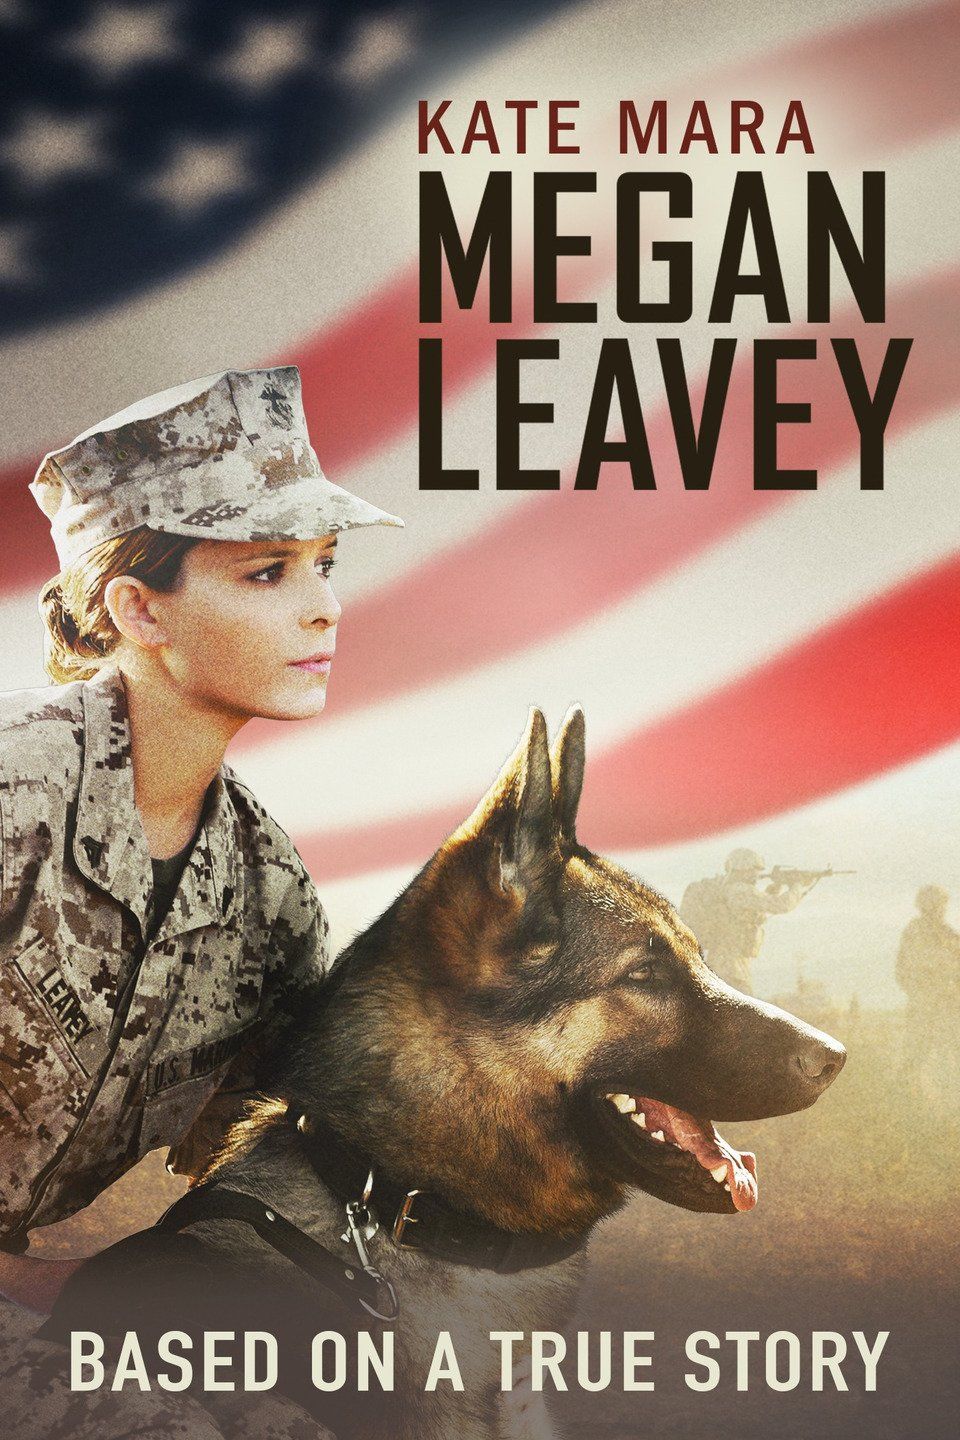 Marines stick together: The story of Cpl. Megan Leavey and Sgt. Rex